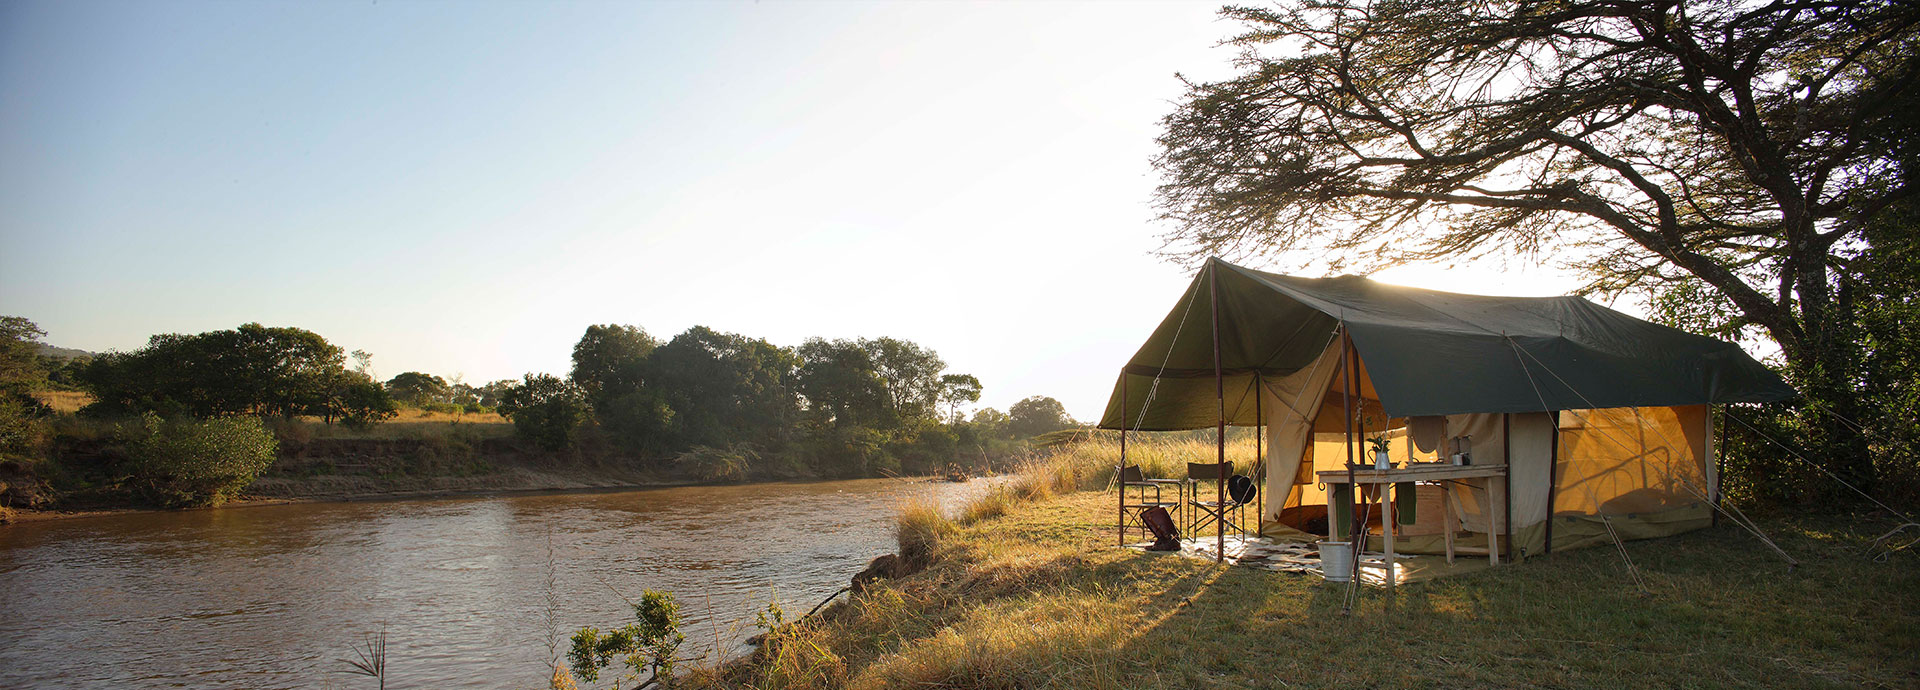 Luxury tents on a horse riding safari in Kenya with Safaris Unlimited